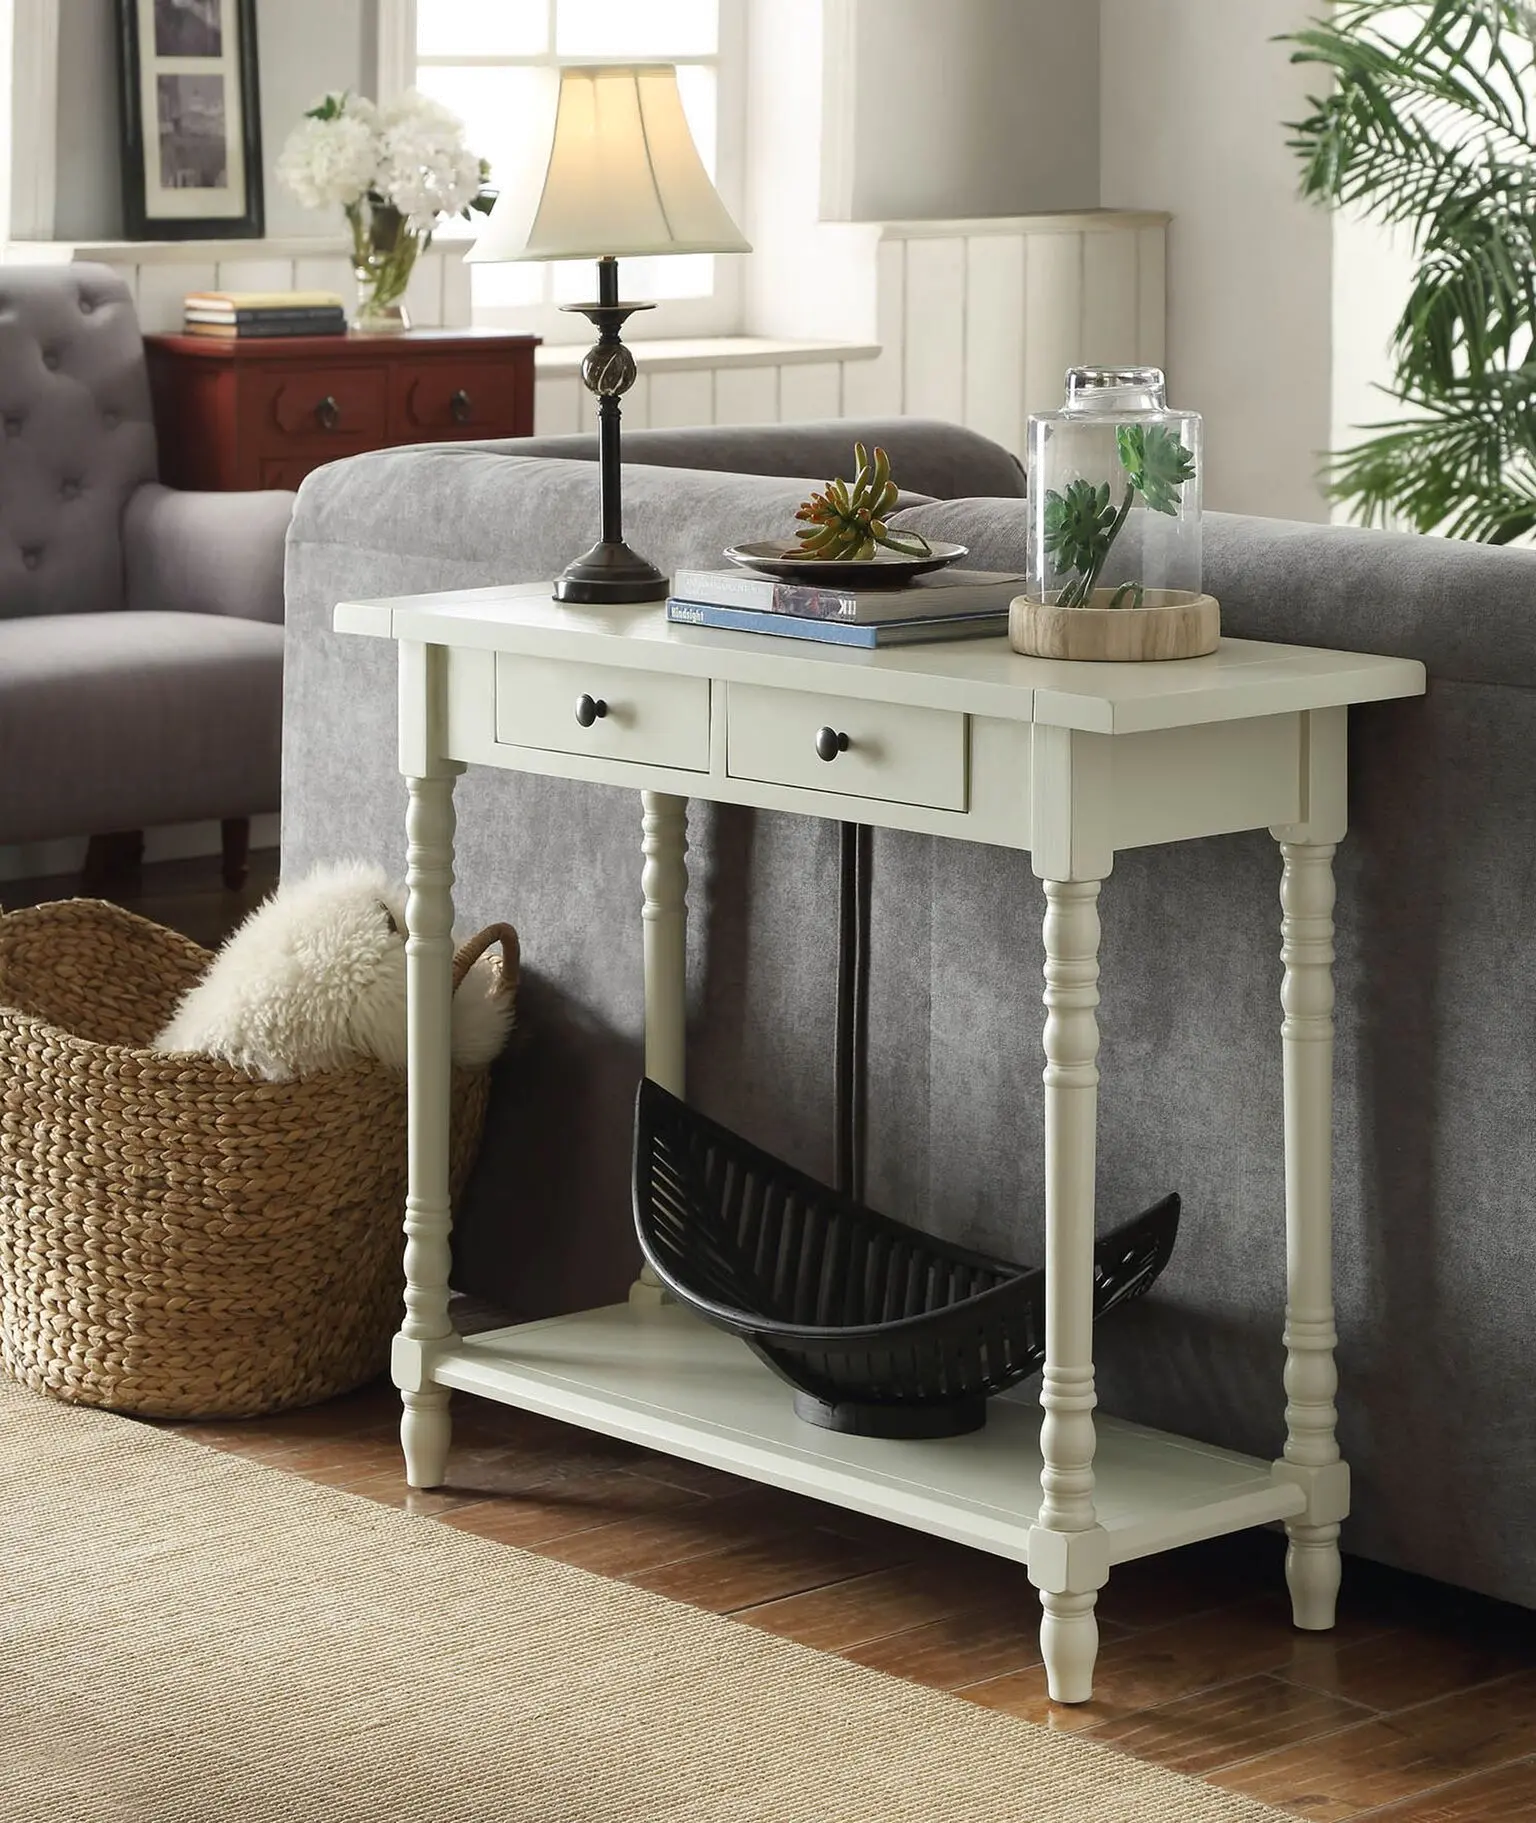 Photos - Coffee Table 4D Concepts Buttermilk White Entry Table - Simplicity 570479